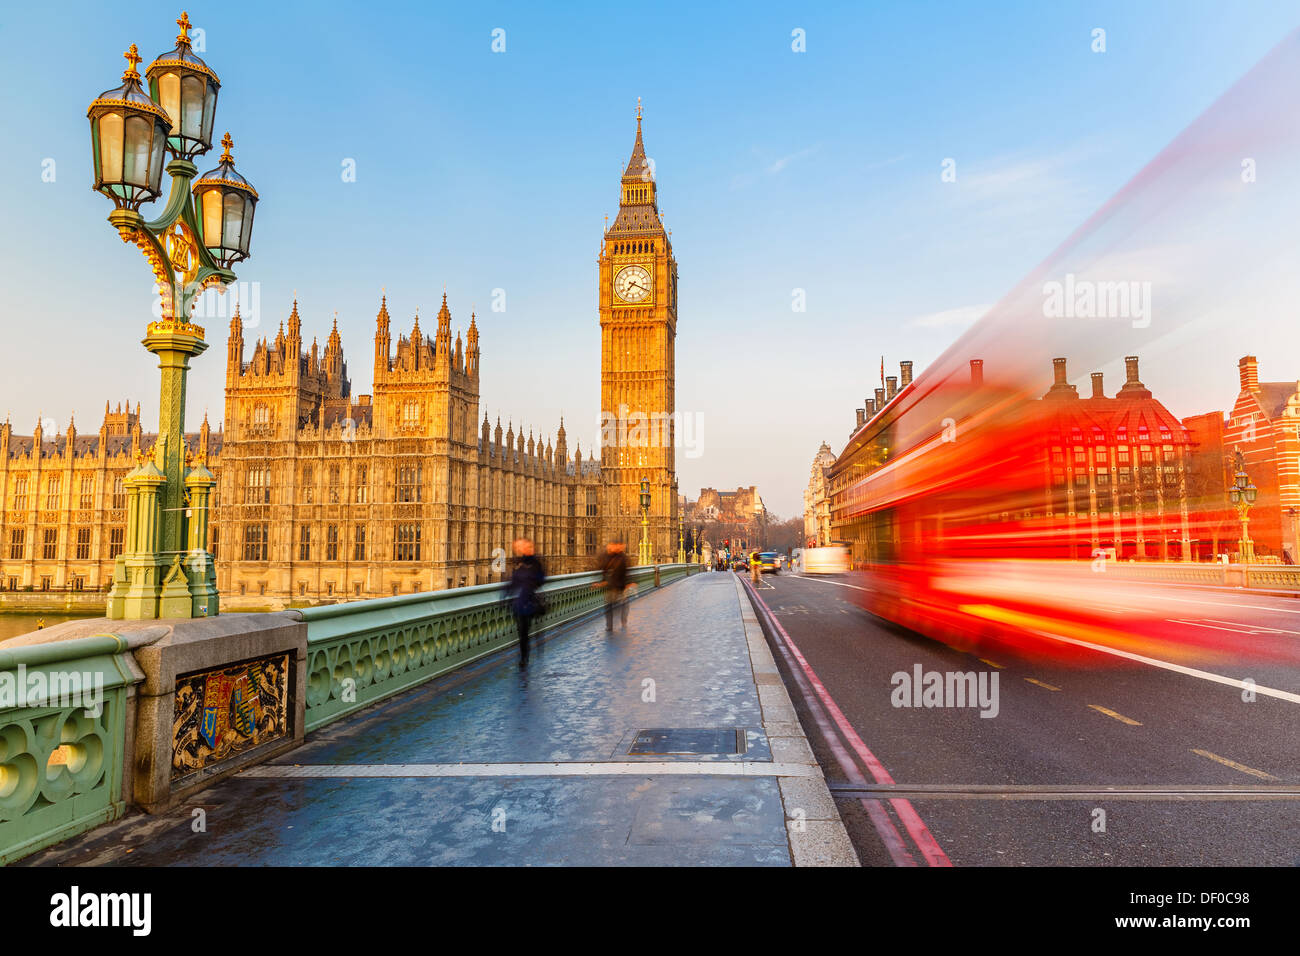 Big Ben and red double-decker bus, London Stock Photo